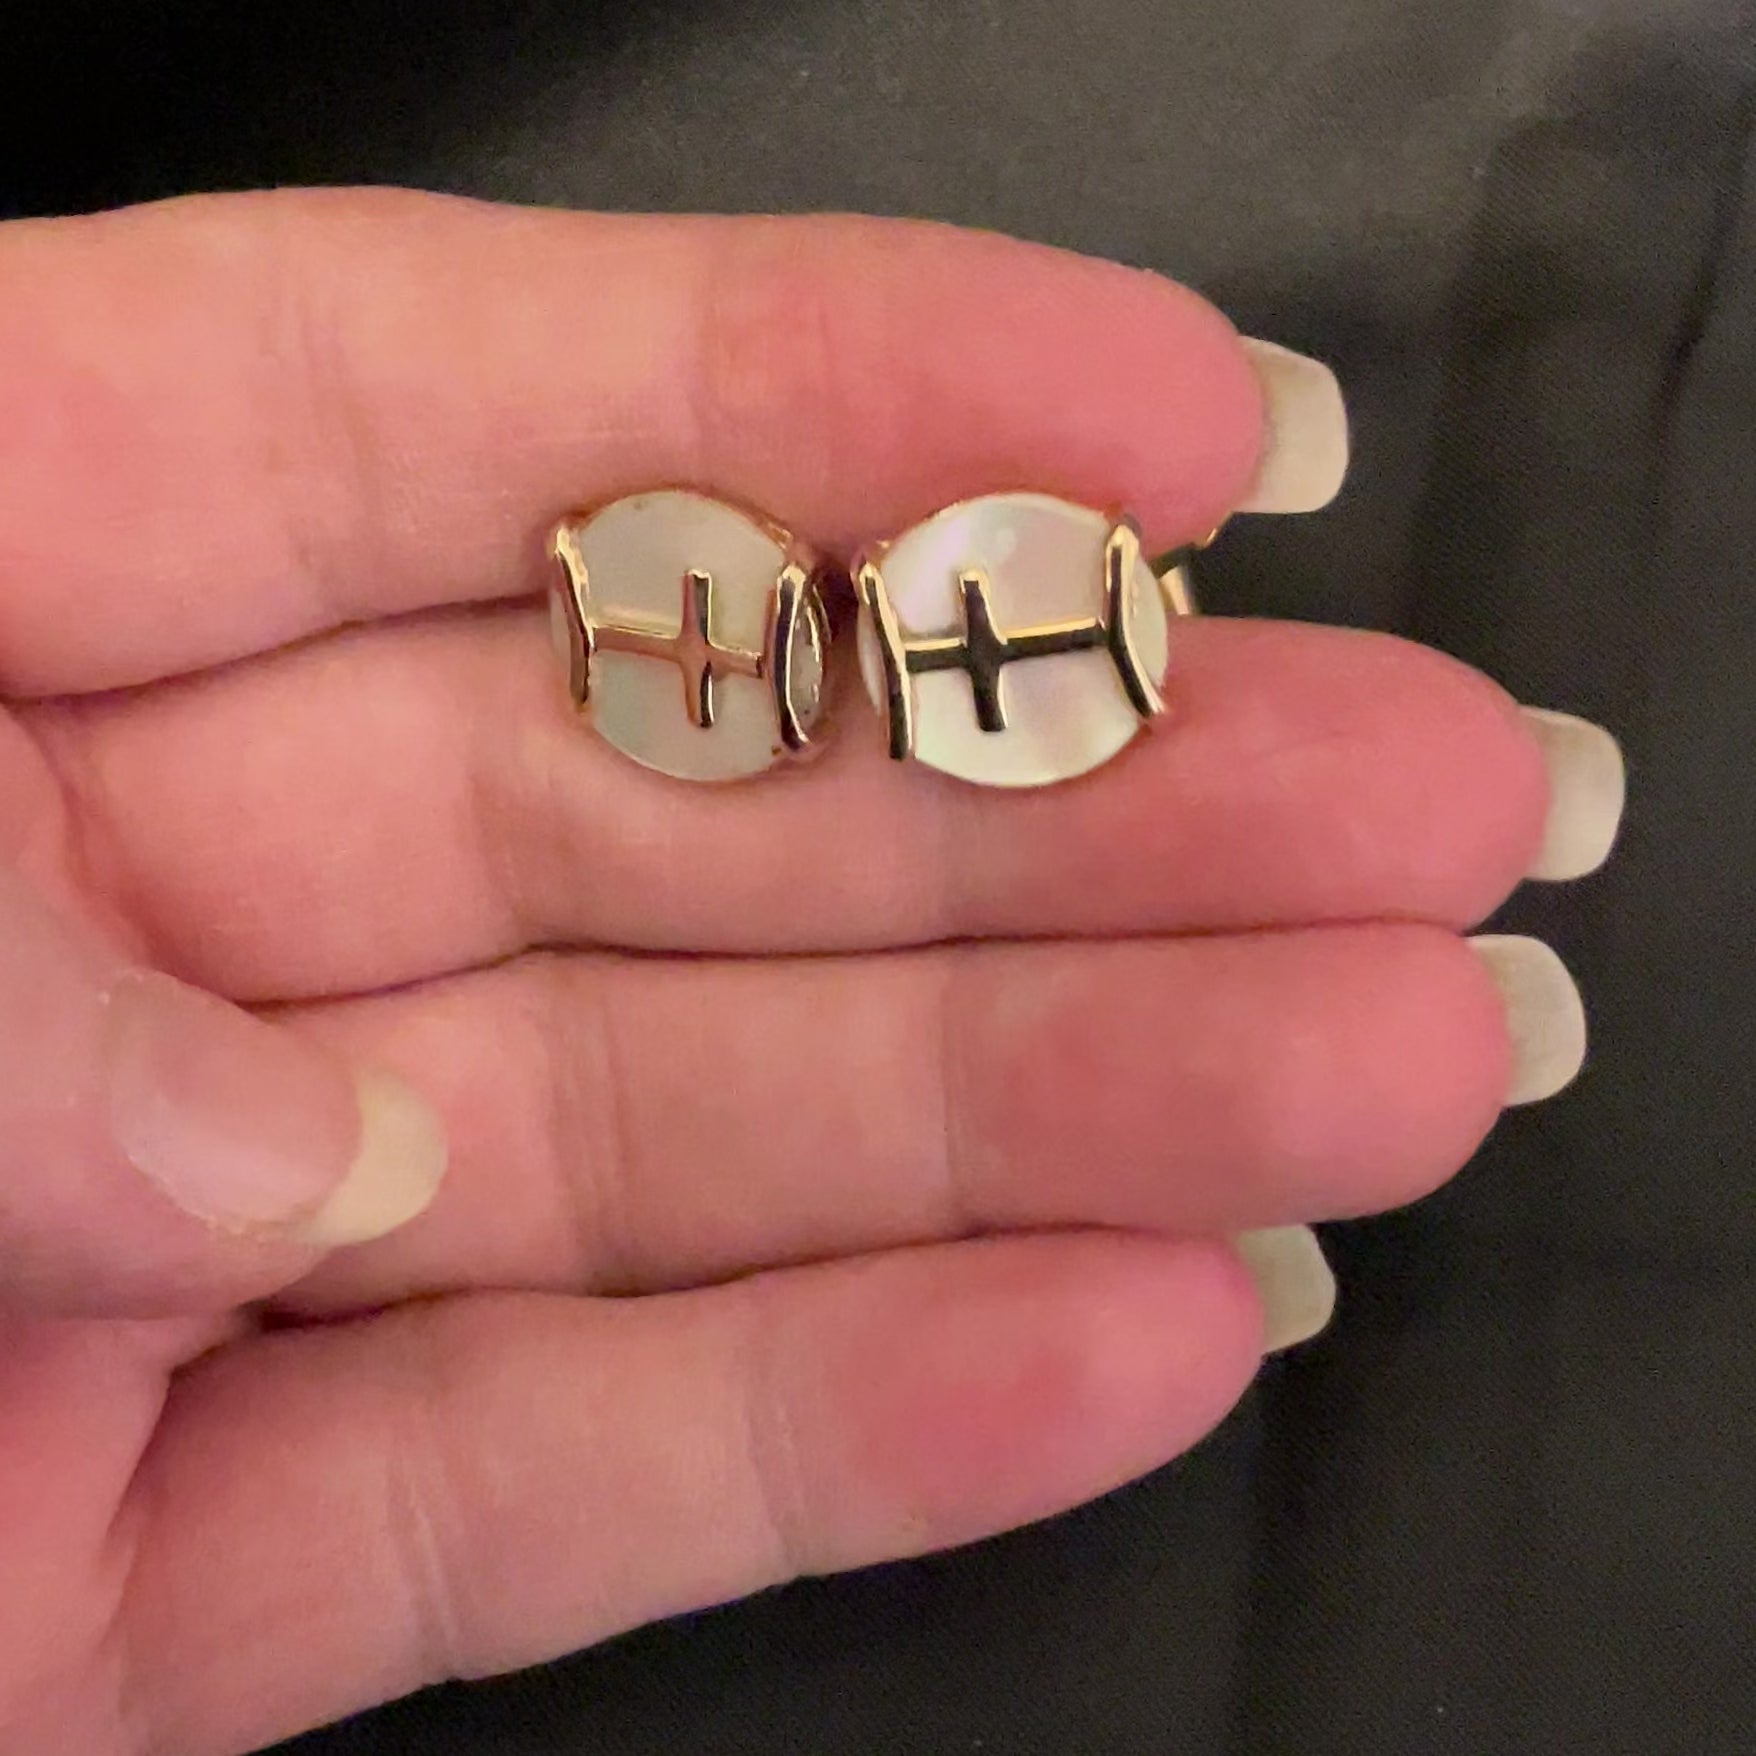 Mother of Pearl Vintage Angled Back Cufflinks video showing how the shell has flashes of pearly color in the light.